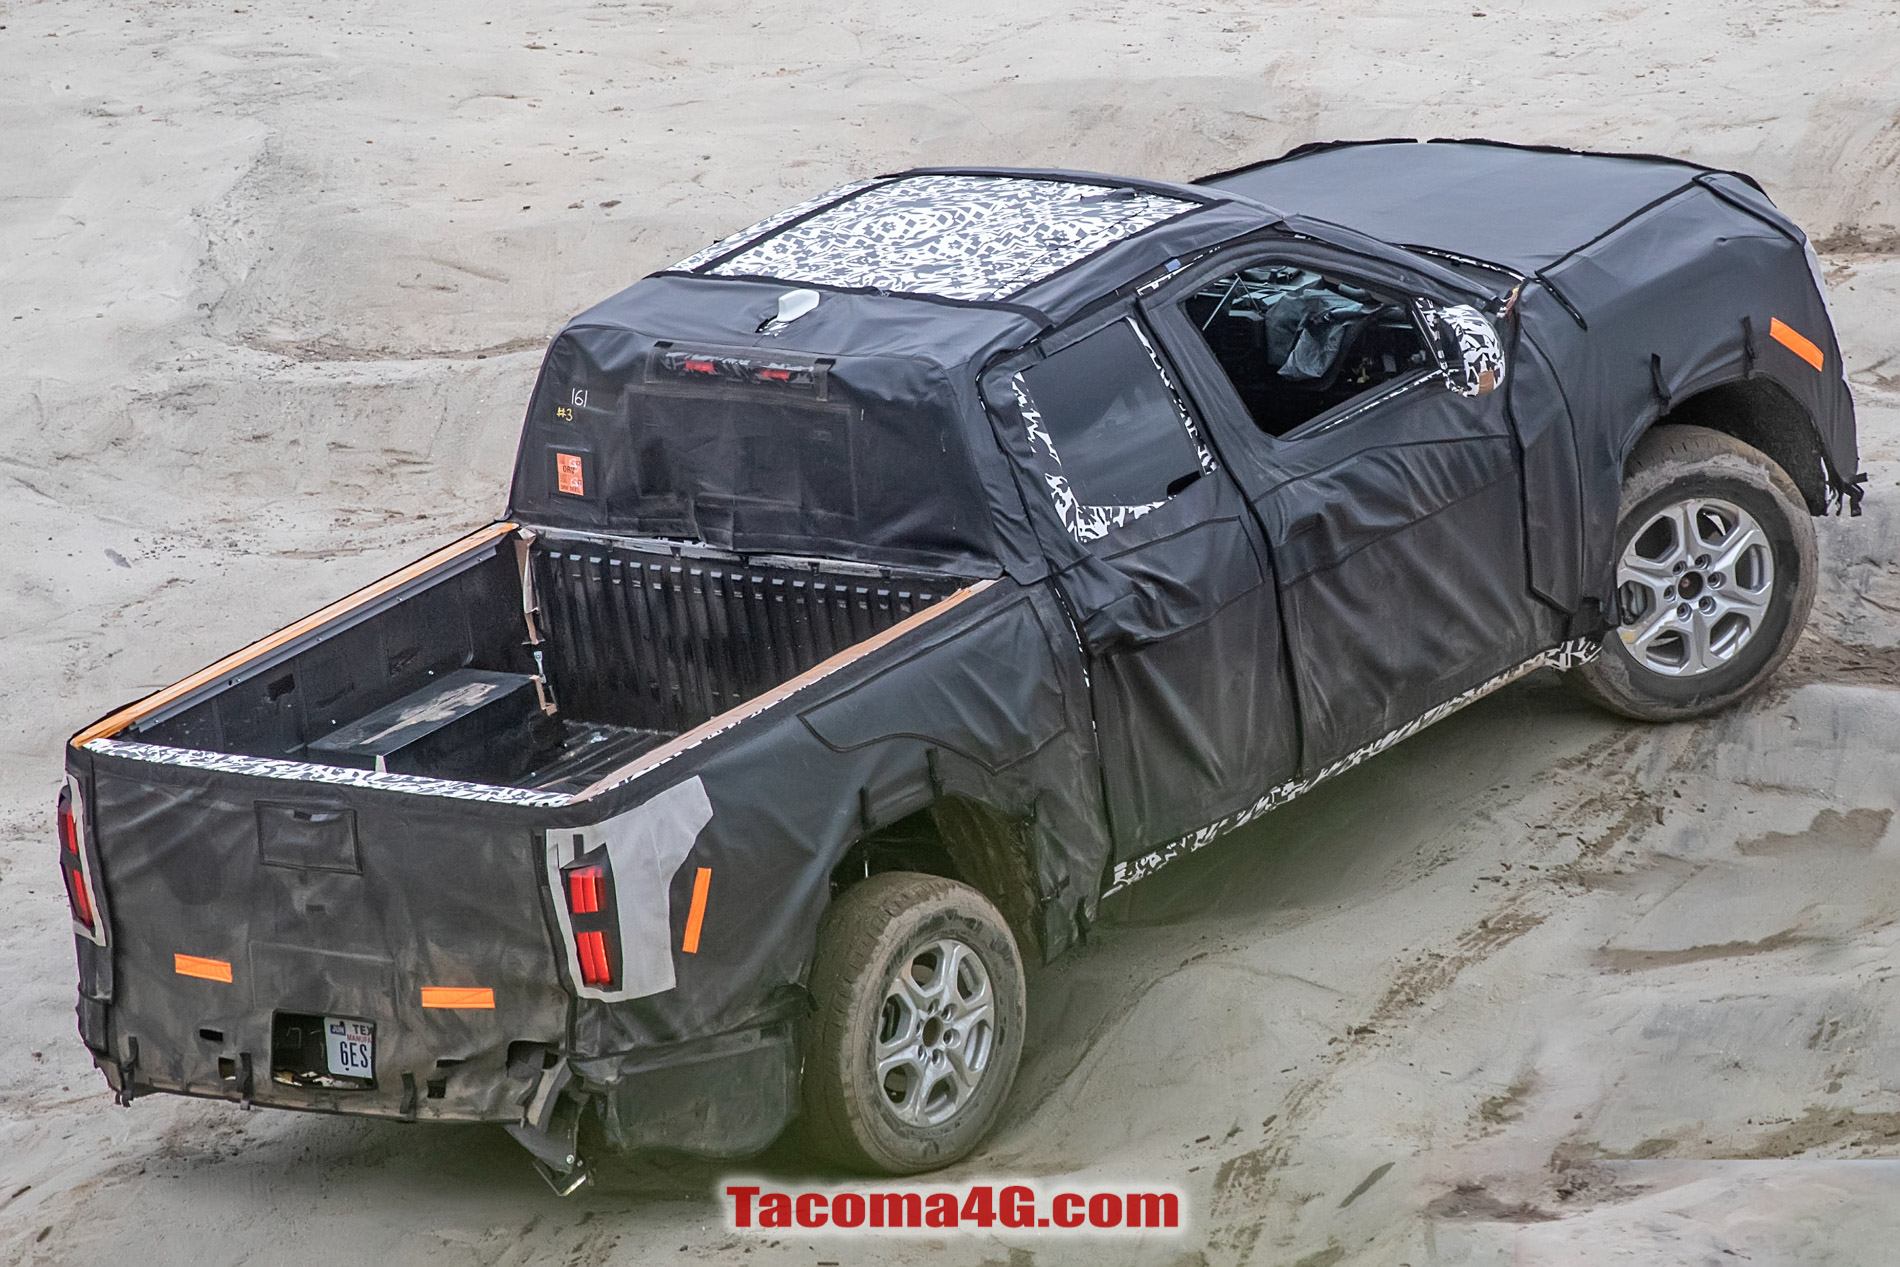 2024 Tacoma New 2024 Tacoma (4th Next Gen) Mule Off-Road Testing Reveals More Suspension Details -- 5/27/22 2024 Toyota Tacoma 4th gen spy photos suspension interior 16